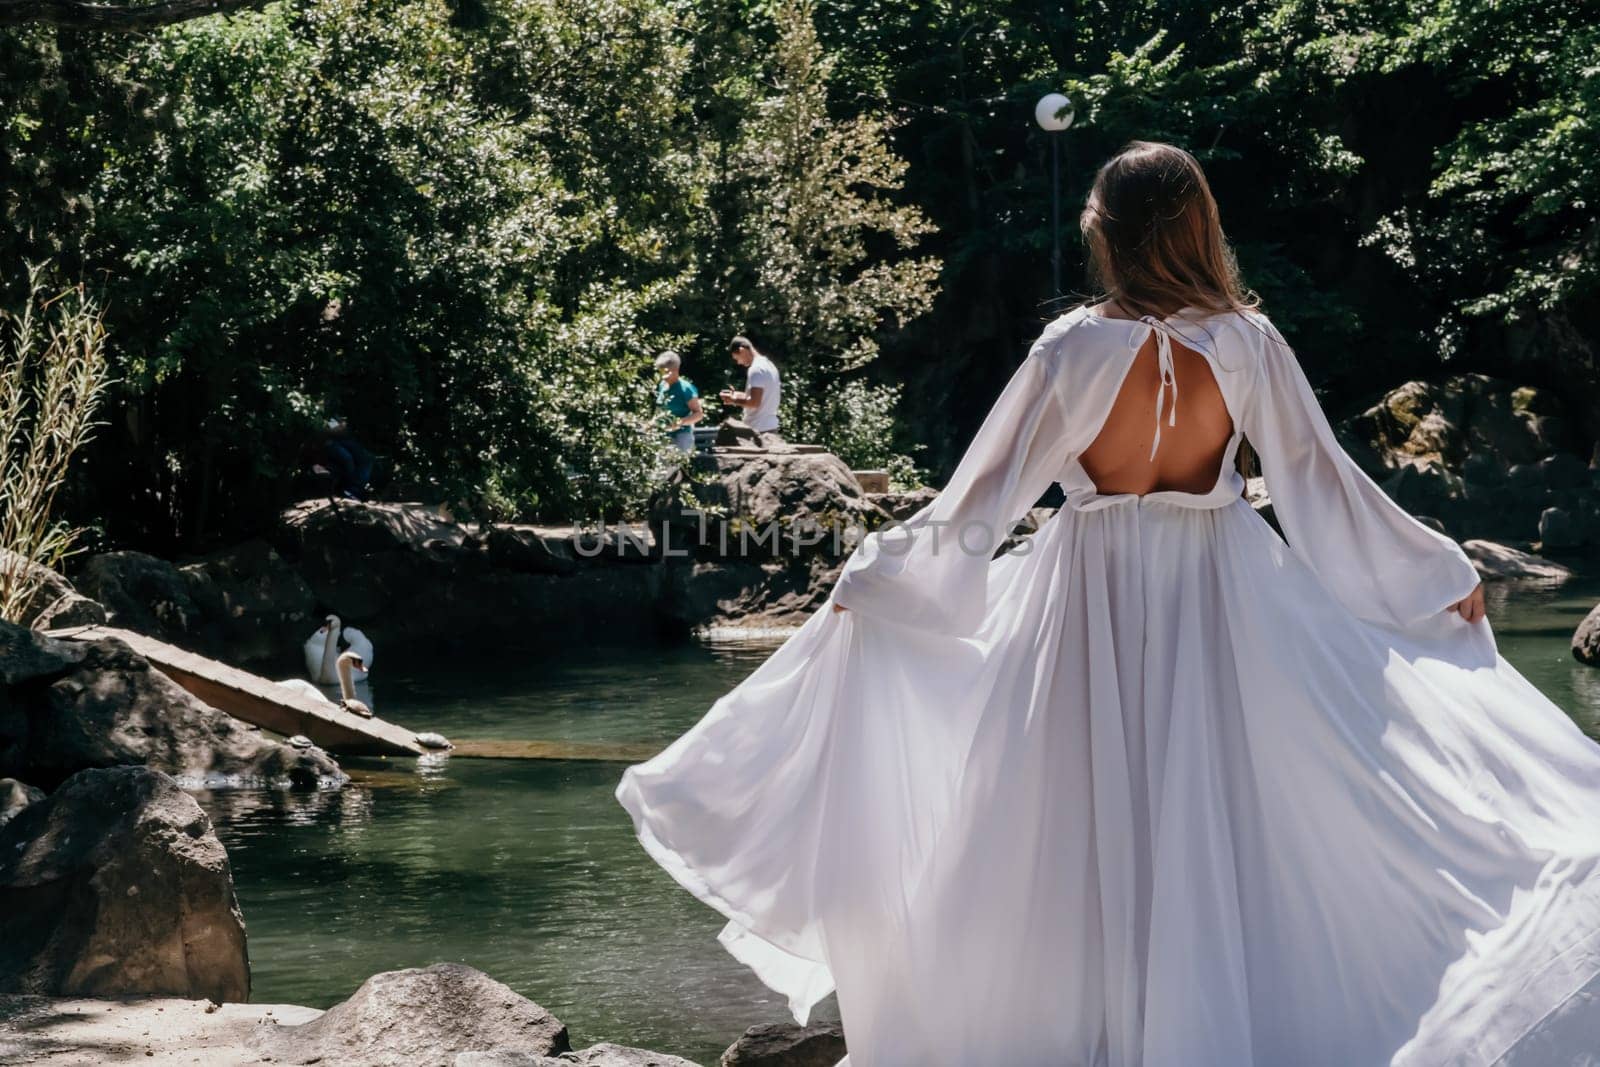 a beautiful woman in a long white dress looks into the distance at a beautiful lake with swans